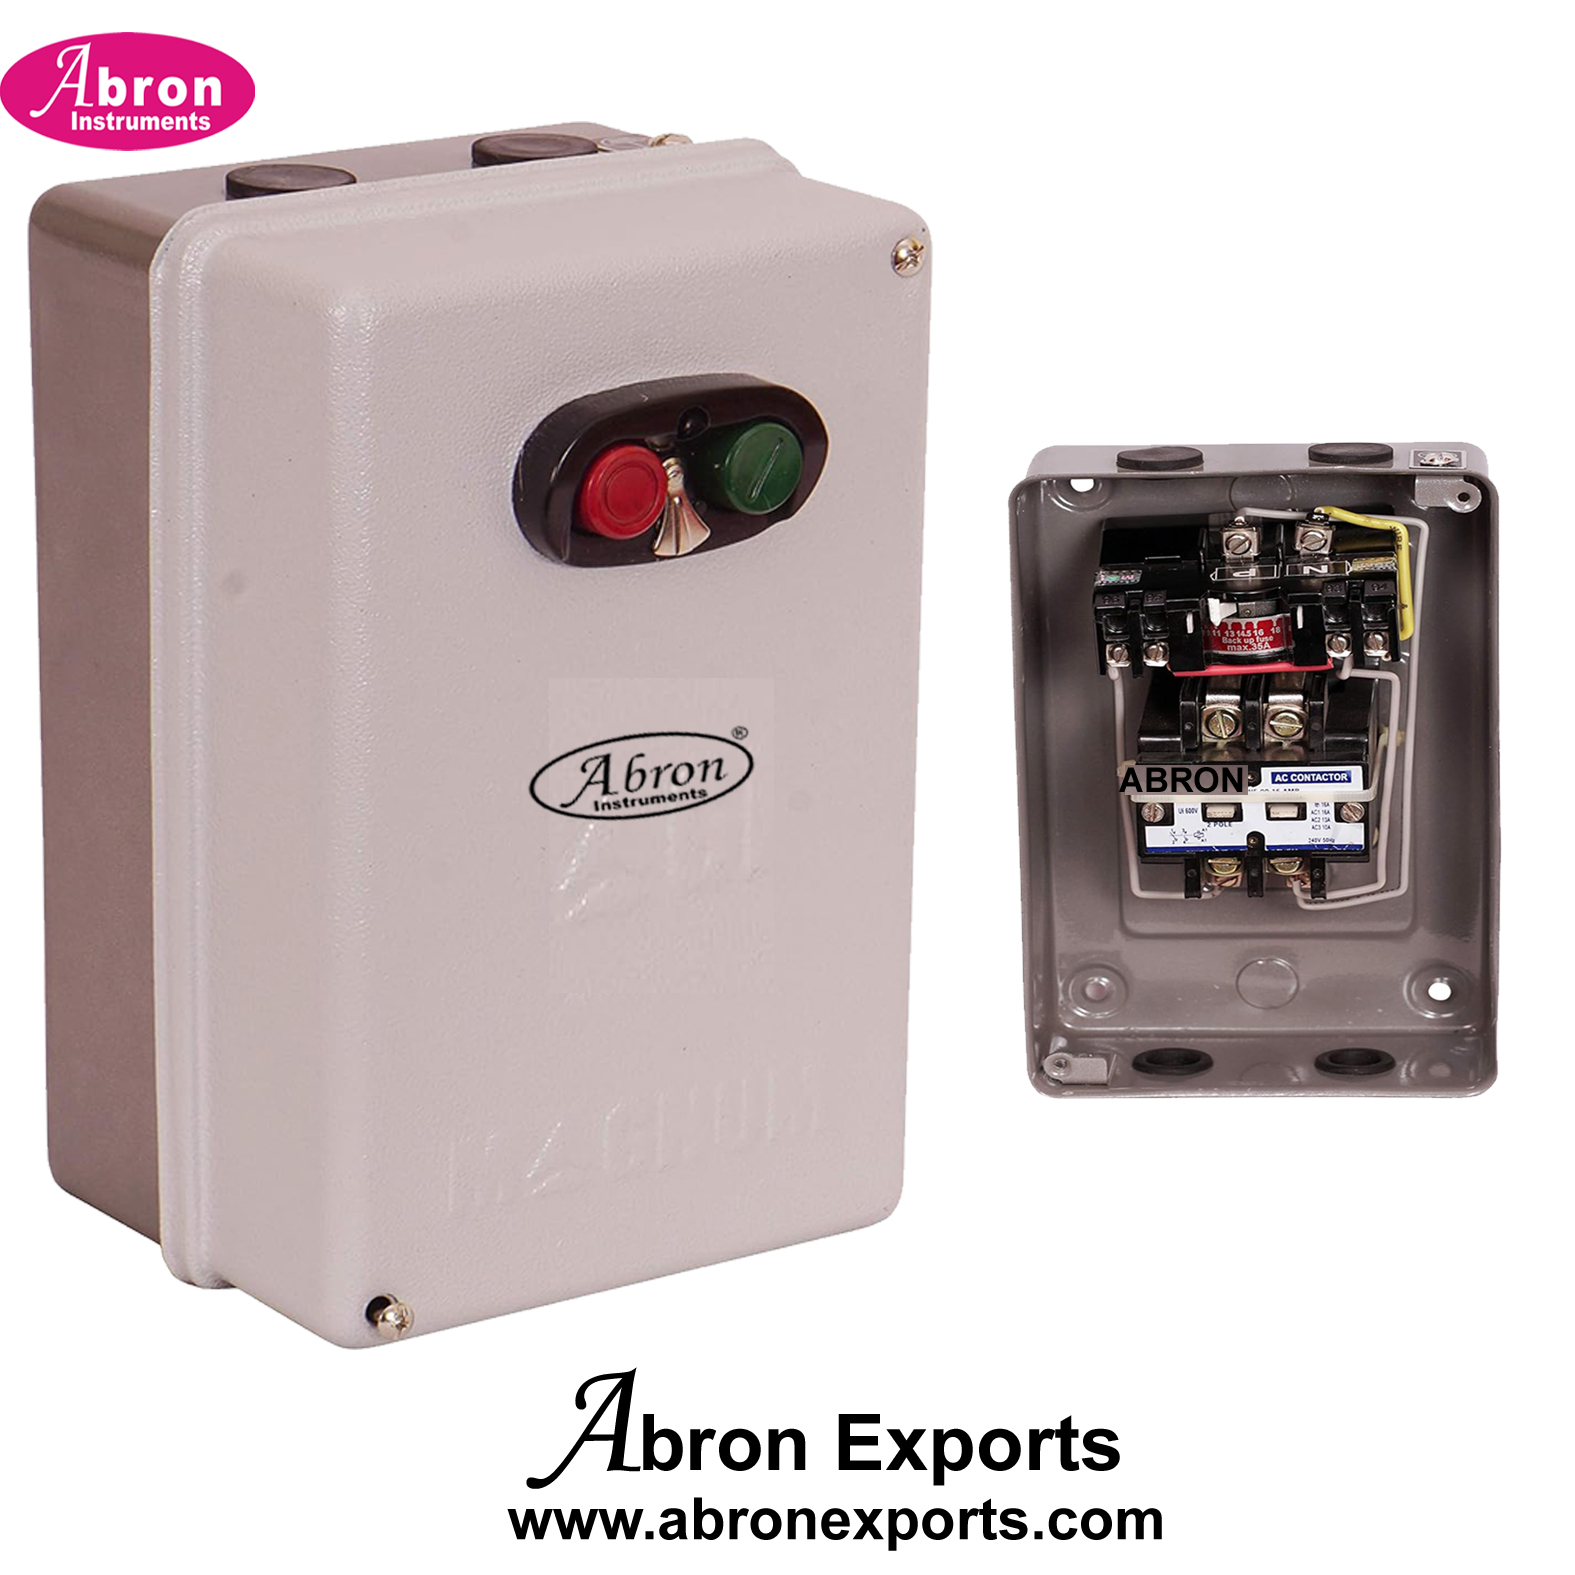 Starter for AC Motor Single Phase 2HP 10-21 Amp with Combination MaCH Relay and Start Stop Switch Abron AE-846AC2H 